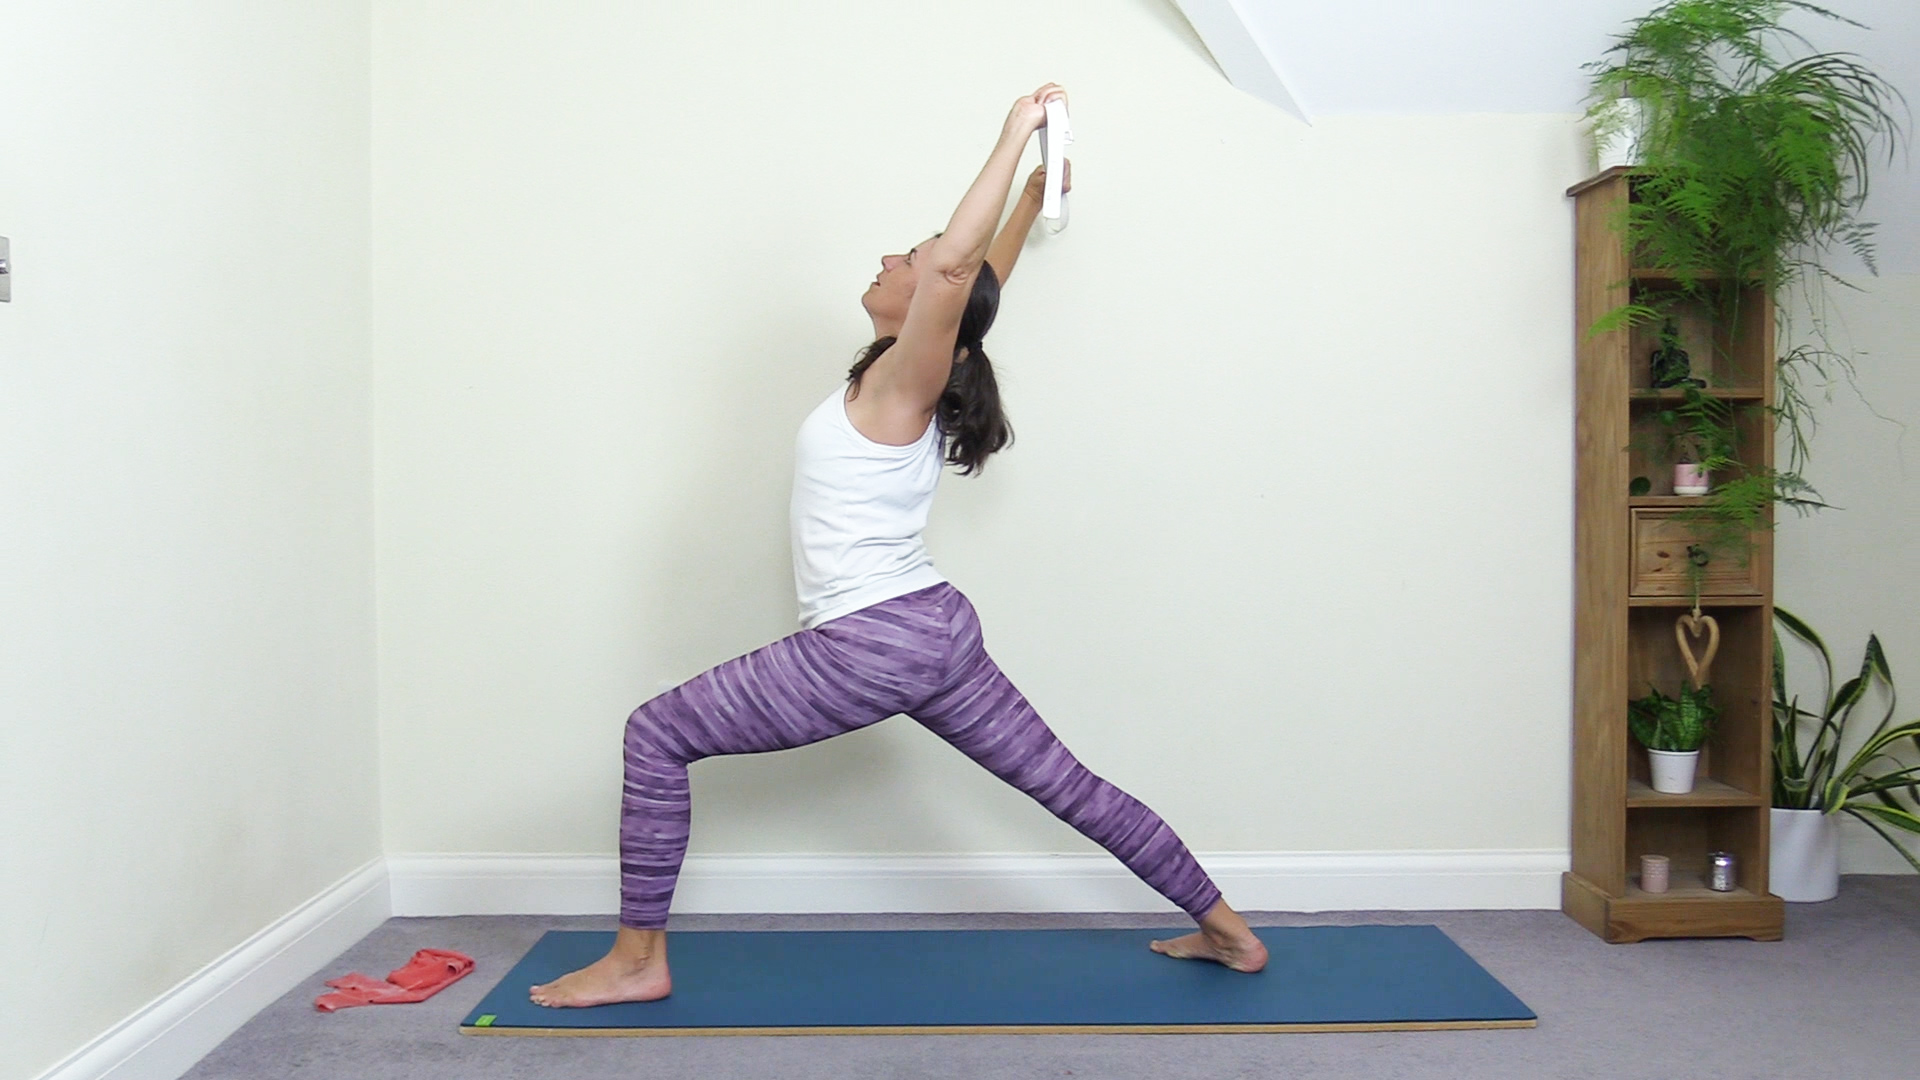 Flamingo Pose Yoga: Benefits, Variations, and Practice Tips